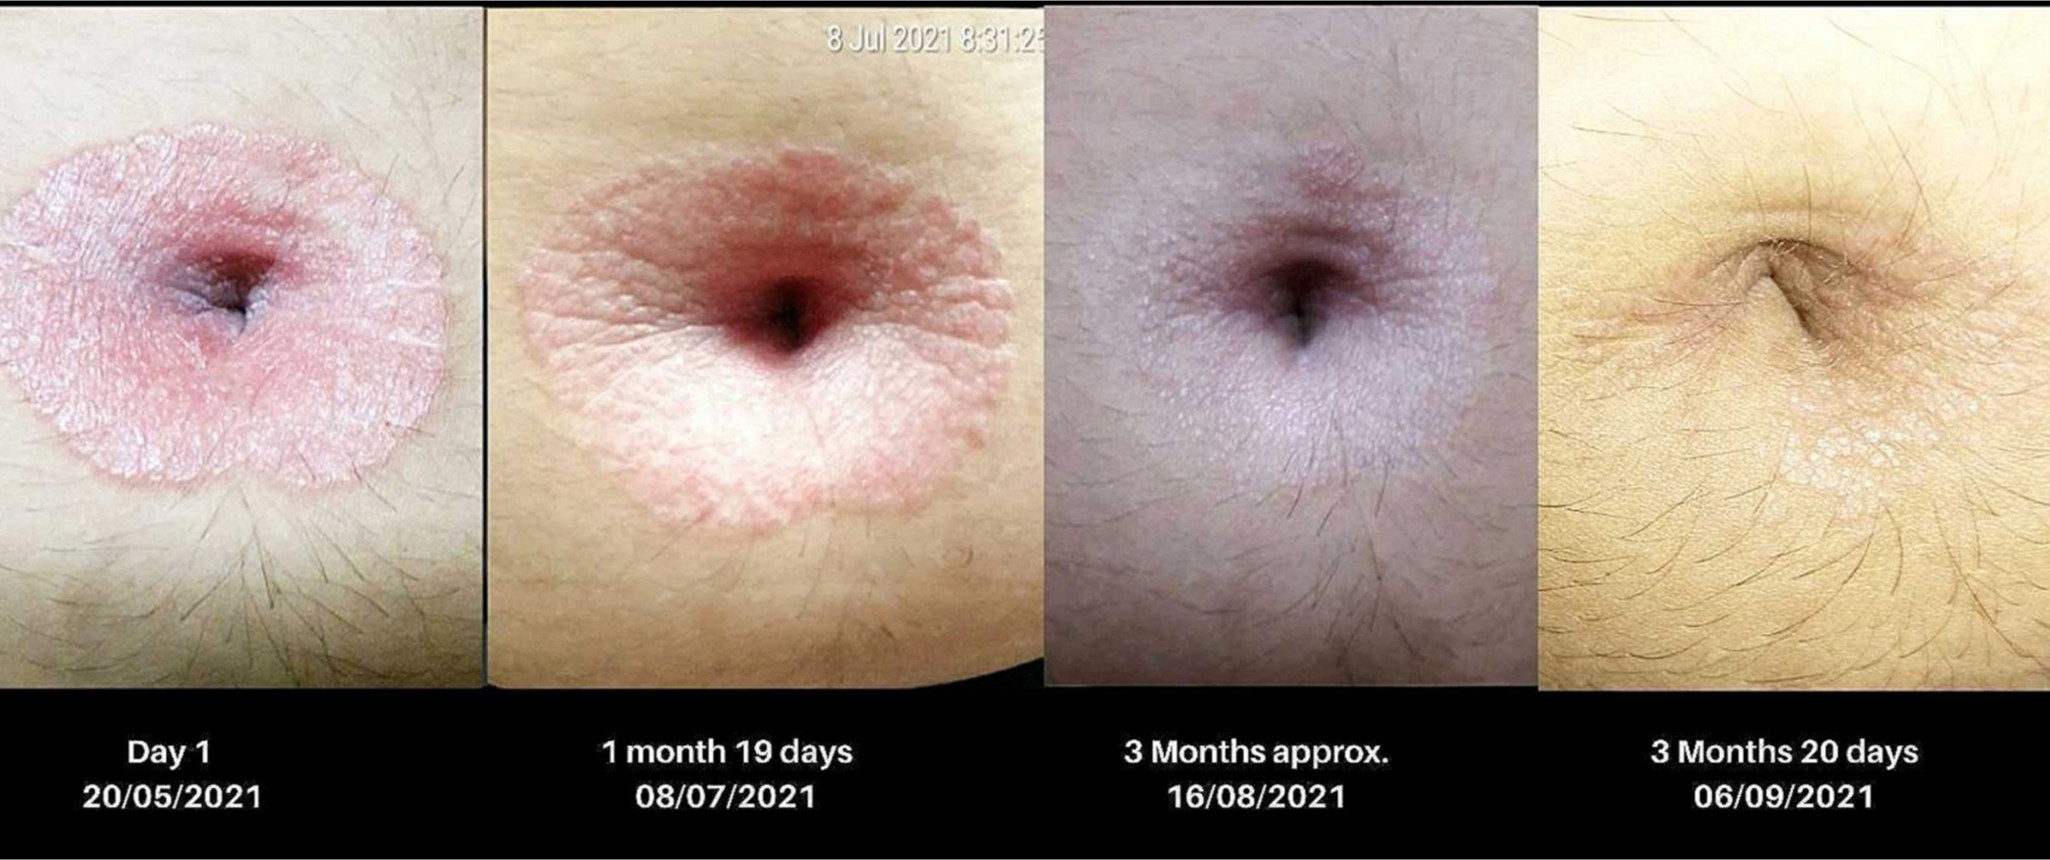 Fig. 12. Peri-umbilical psoriasis in a 17-year-old female, present 2 years. Unresponsive to topical steroids and numerous other treatments. Healed by wheatgrass extract in 4 months with once weekly application.